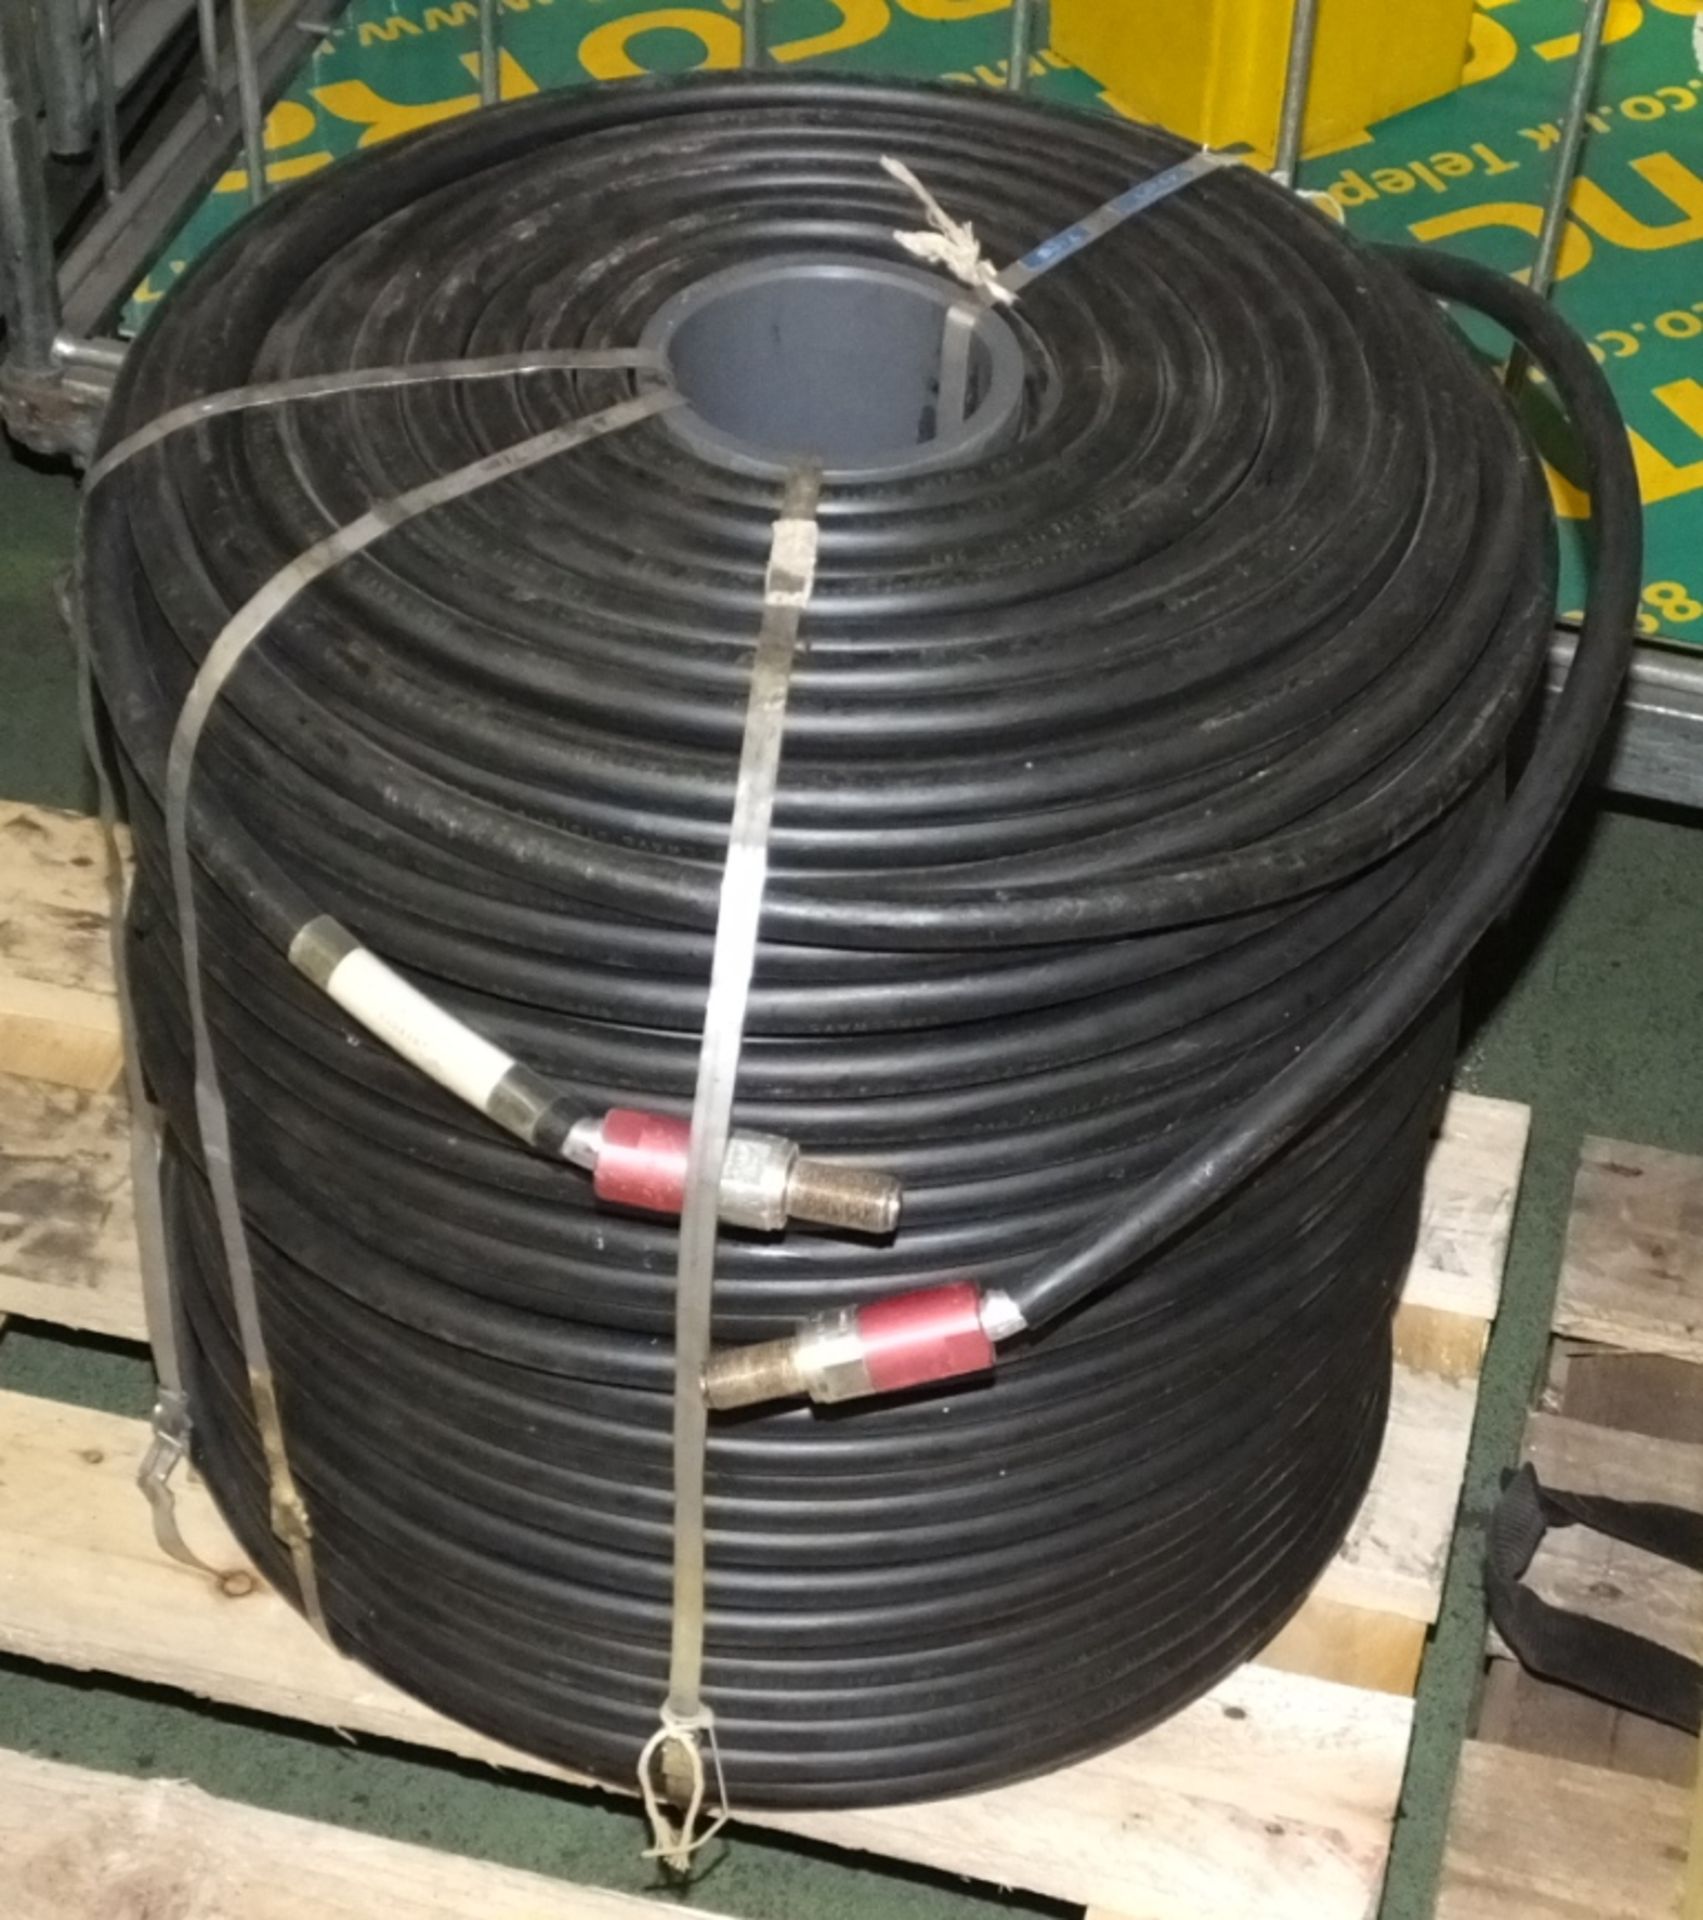 Reel of Coaxial cable